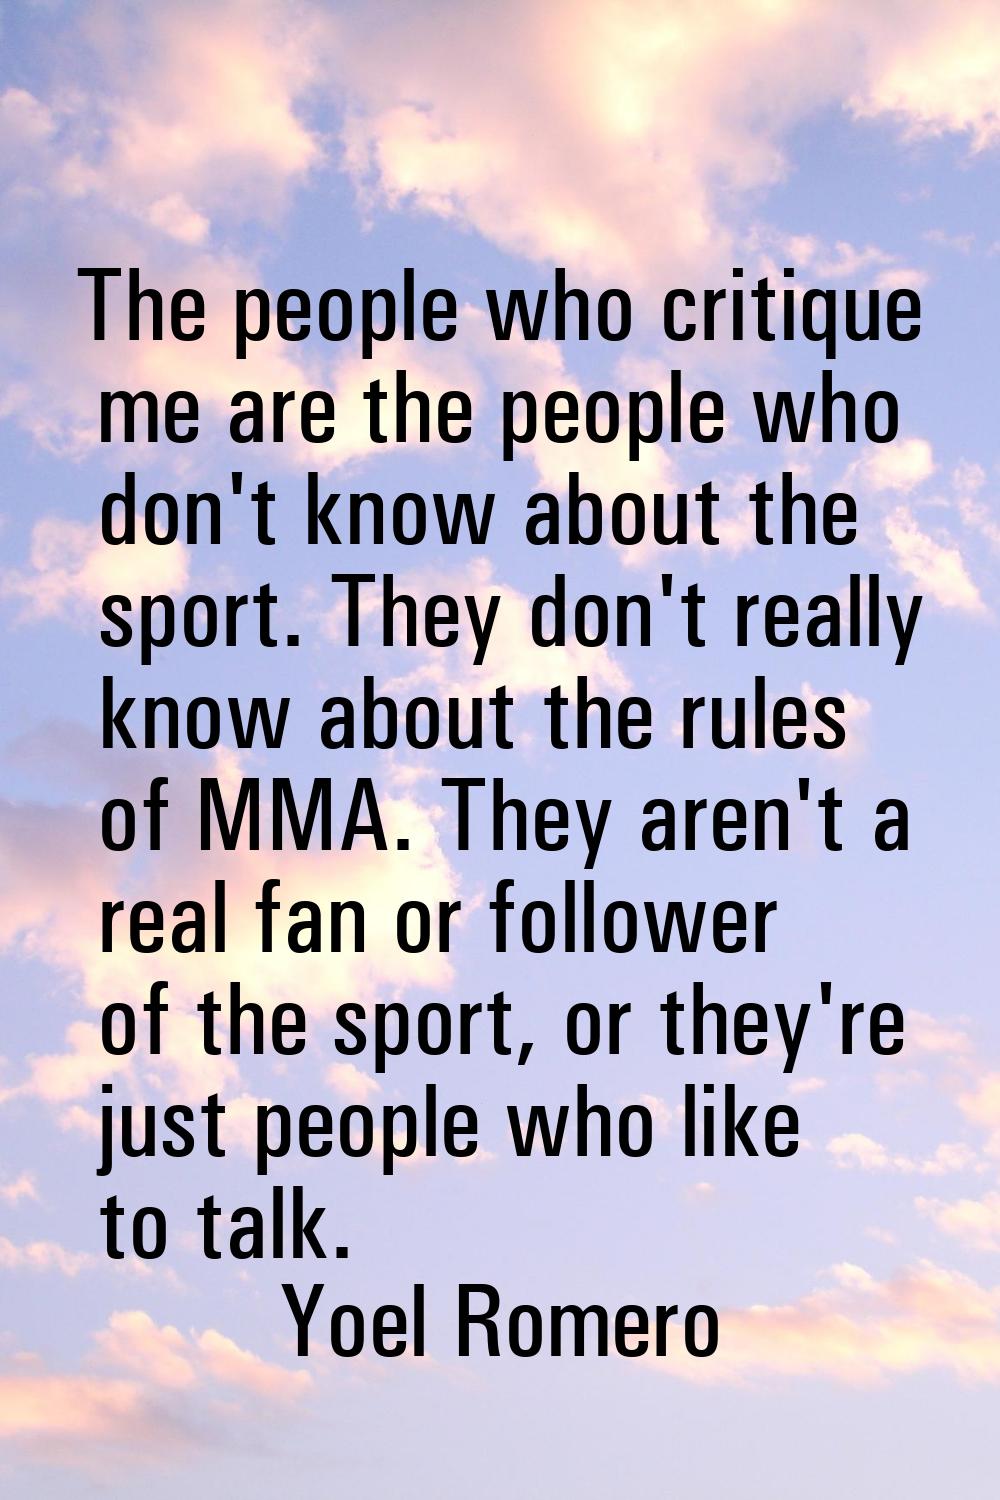 The people who critique me are the people who don't know about the sport. They don't really know ab